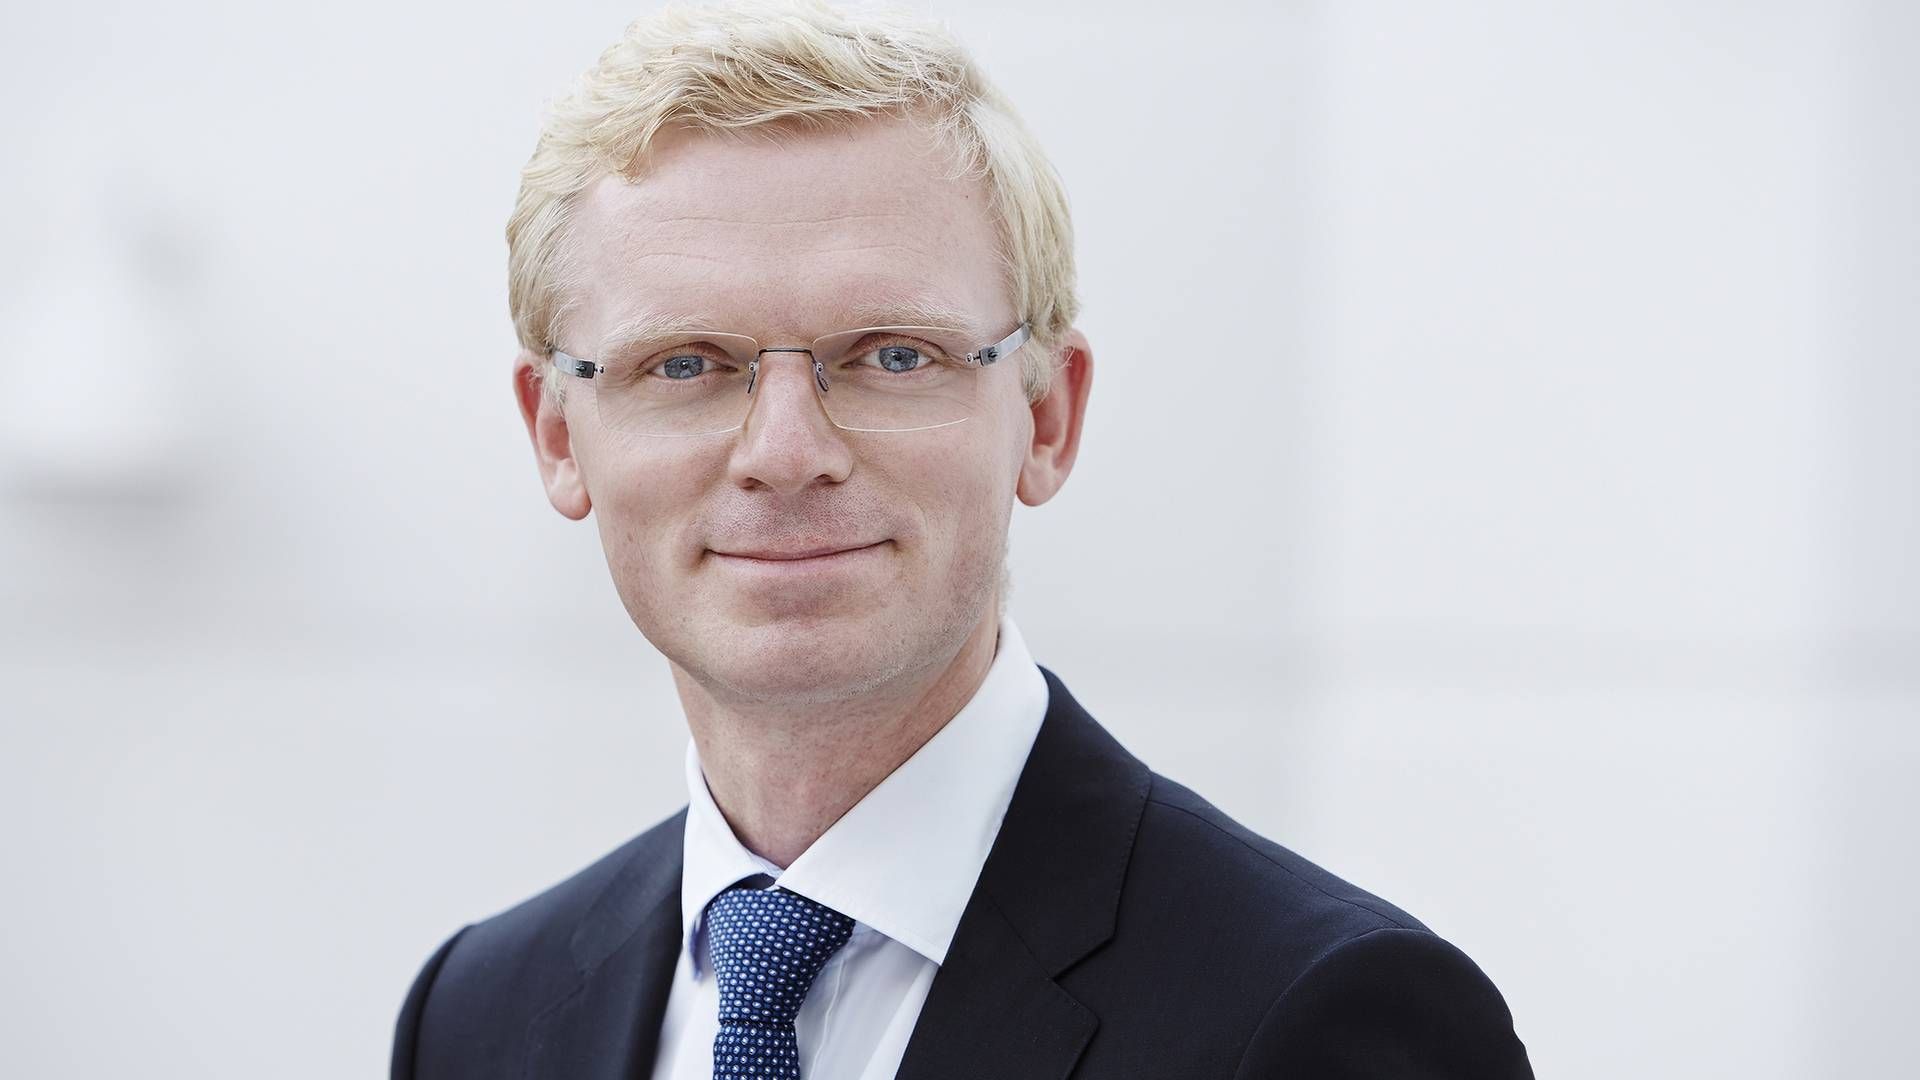 "The existing real estate portfolio provides a solid foundation to build on through our own direct investments as well as in partnerships with other large investors," says Søren Tang Kristensen, who has been appointed new Head of Real Estate at Industriens Pension. | Photo: Industriens Pension